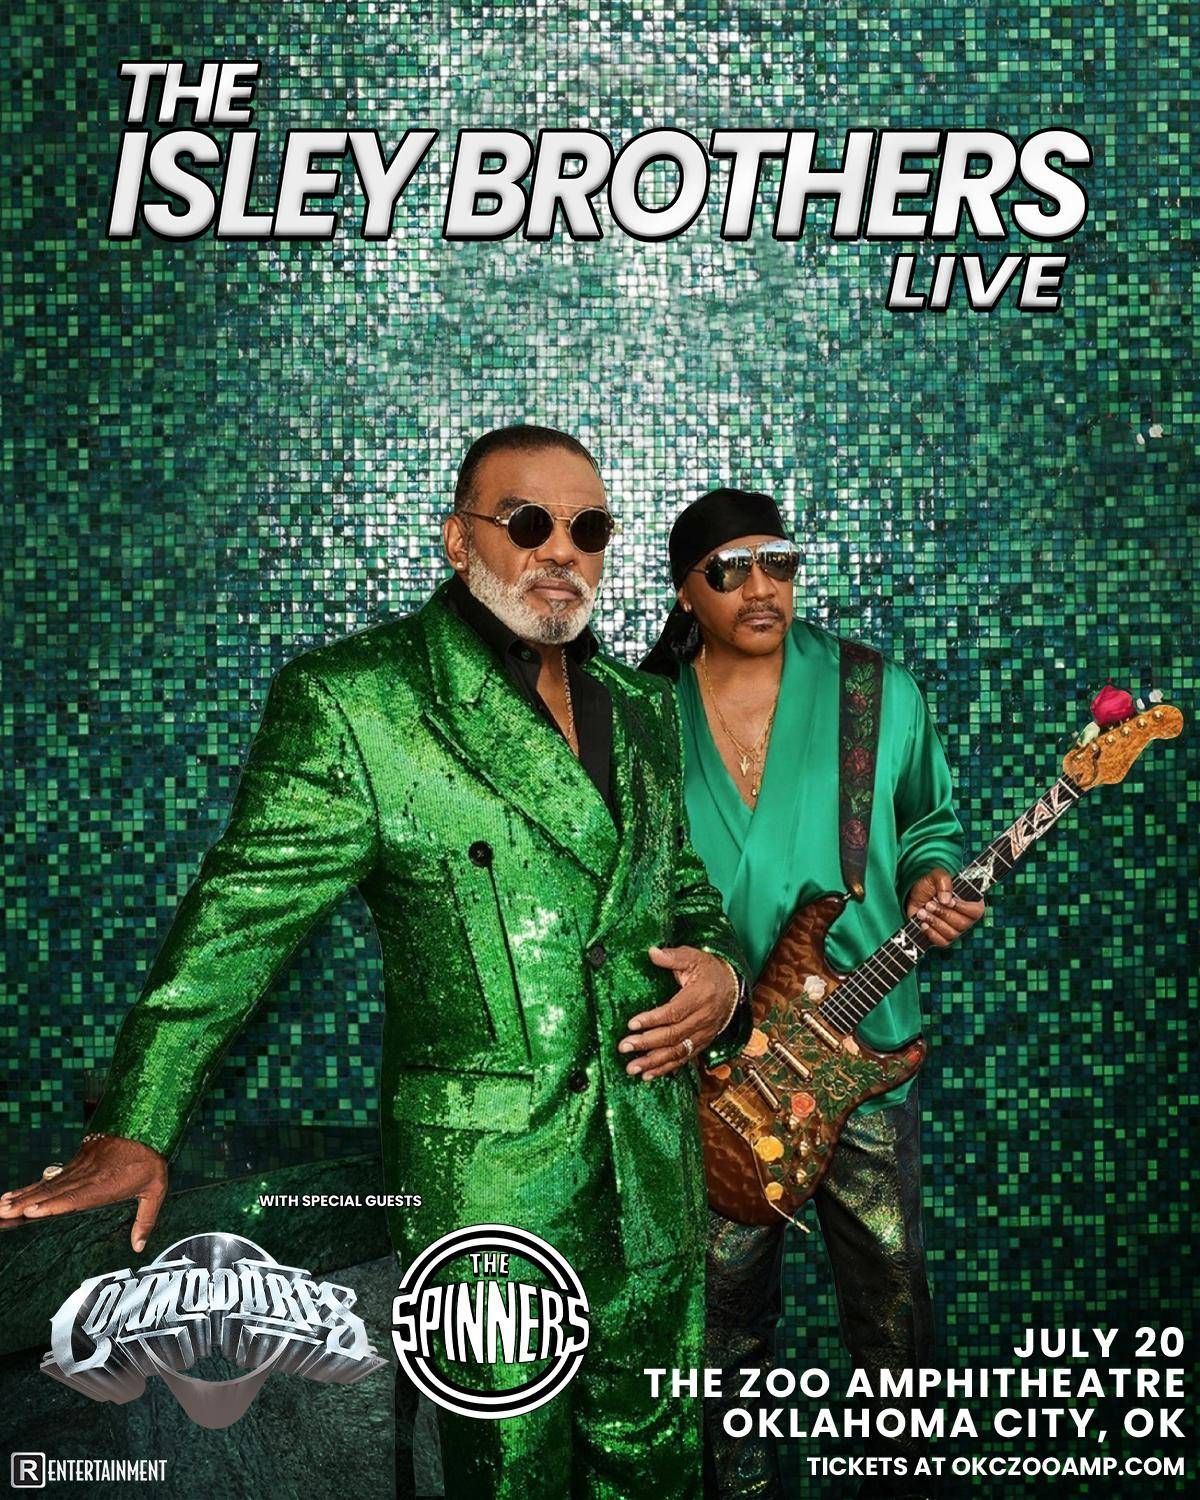 The Isley Brothers, Commodores, and The Spinners: Oklahoma City OK. 